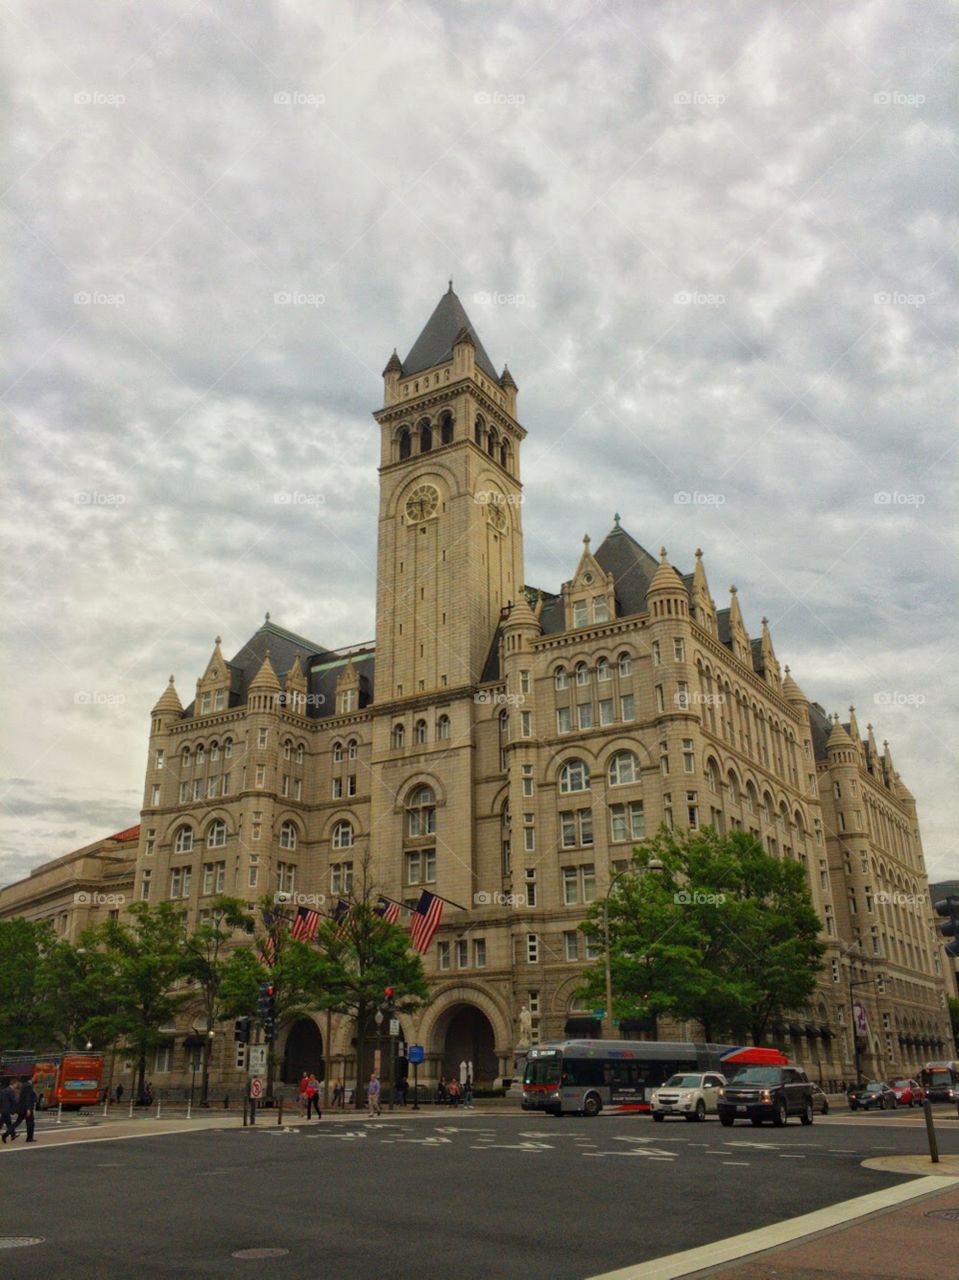 This street photo was one that I managed to snag as I ran around Washington DC between meetings earlier this spring. The building pictured is the Old Post Office, now the Trump International Hotel. It's a stunning piece of architecture - too bad you can't see the ornate stone inlays from this distance. 